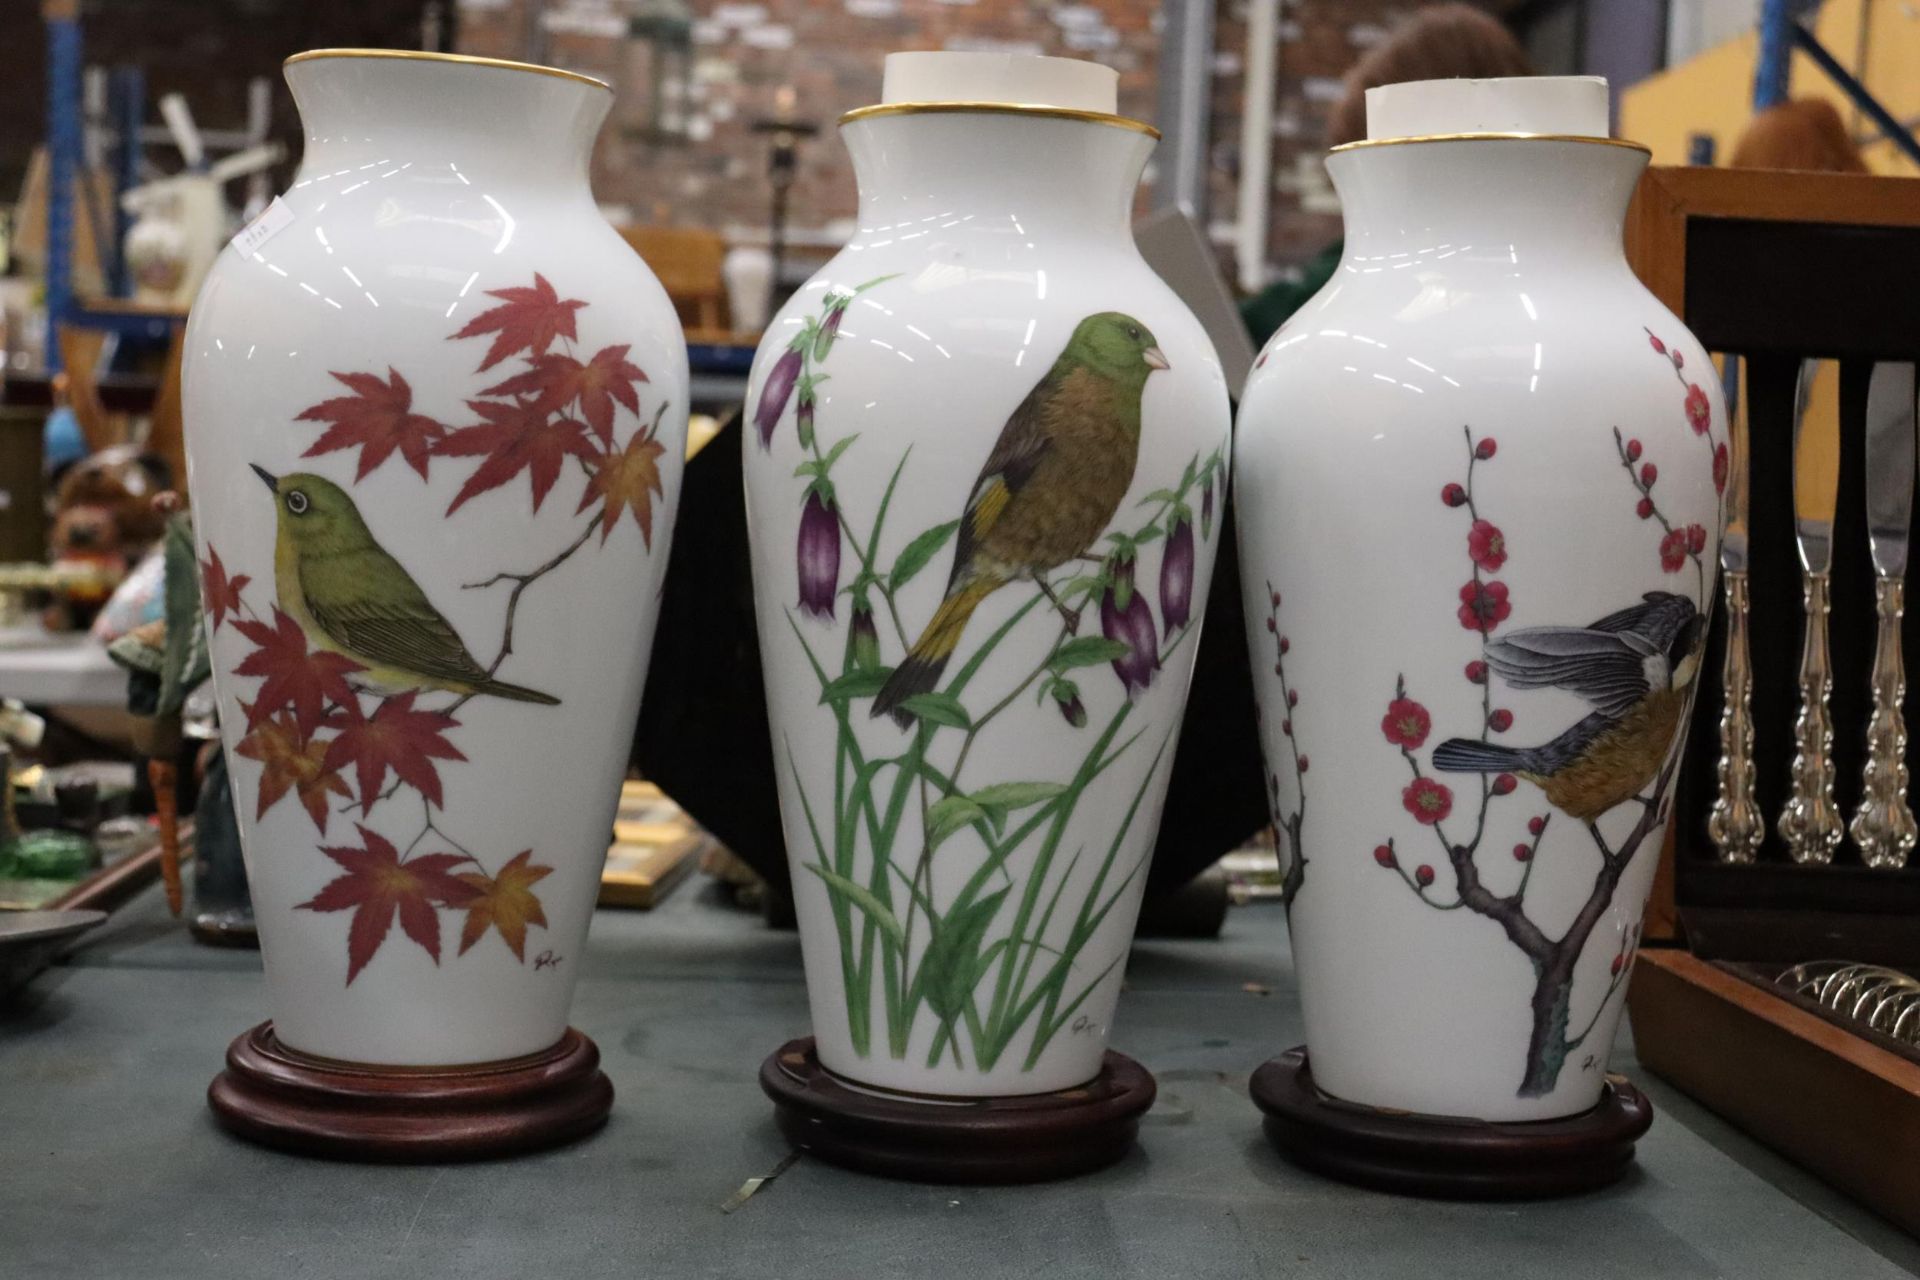 THREE LARGE FRANKLIN PORCELAIN VASES WITH JAPANESE CHARACTERS TO BASE AND WOODEN STANDS, THE HERALDS - Image 6 of 7